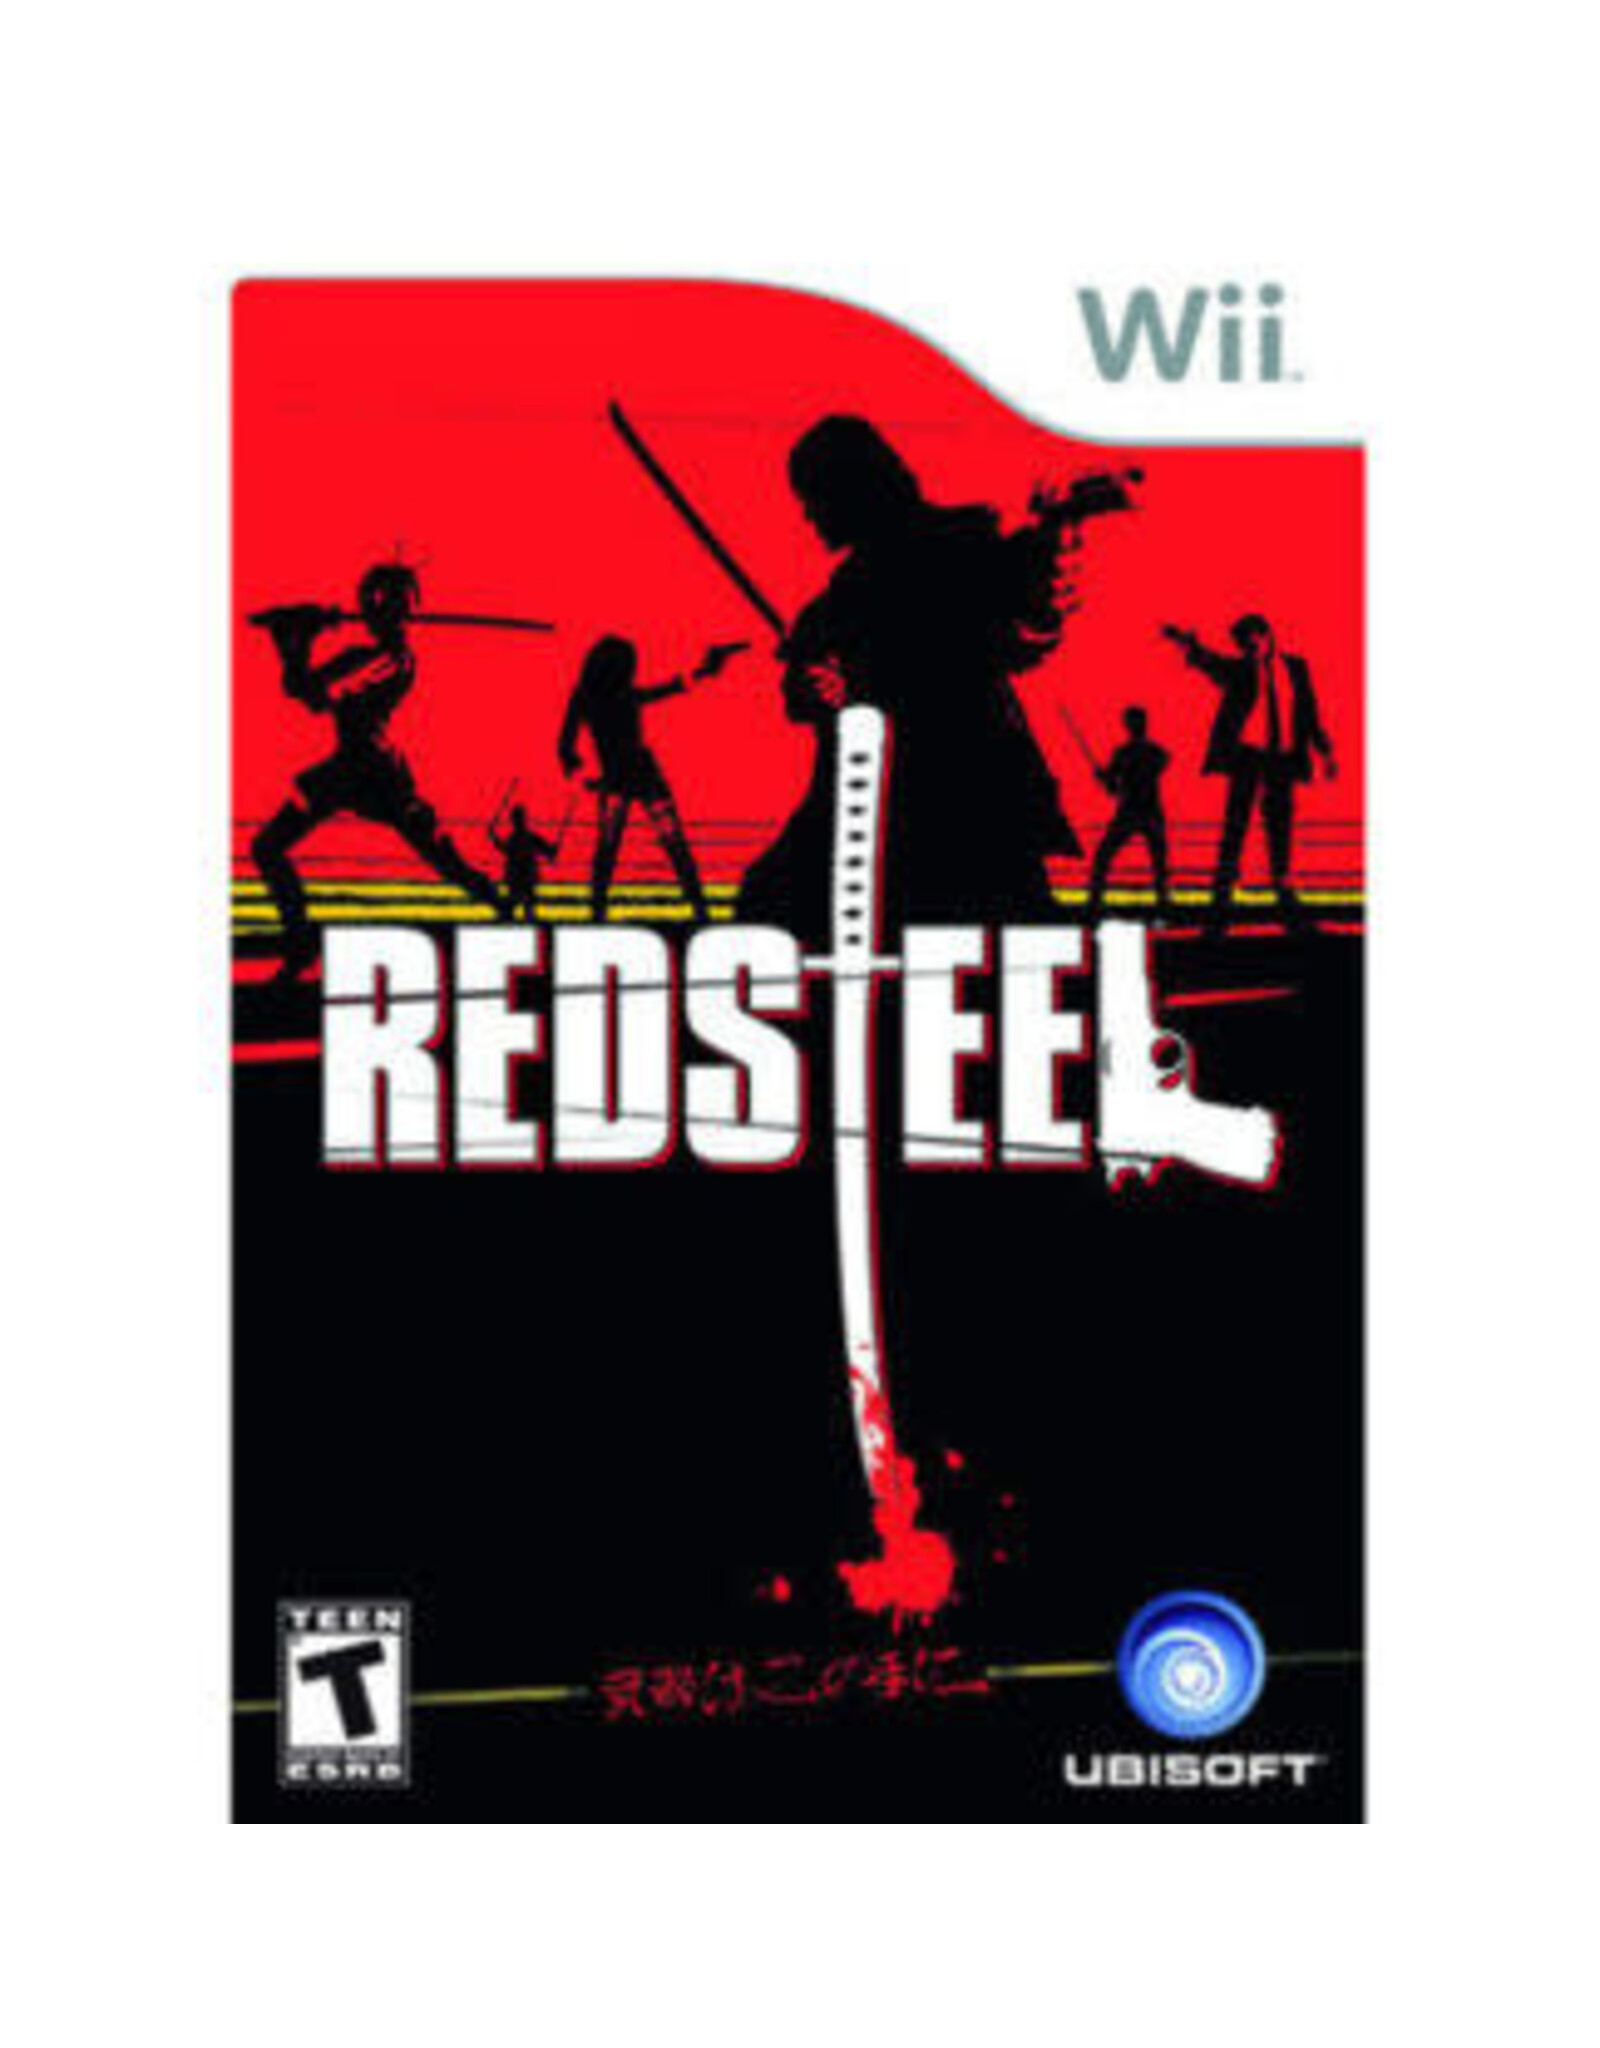 Wii Red Steel (No Manual)